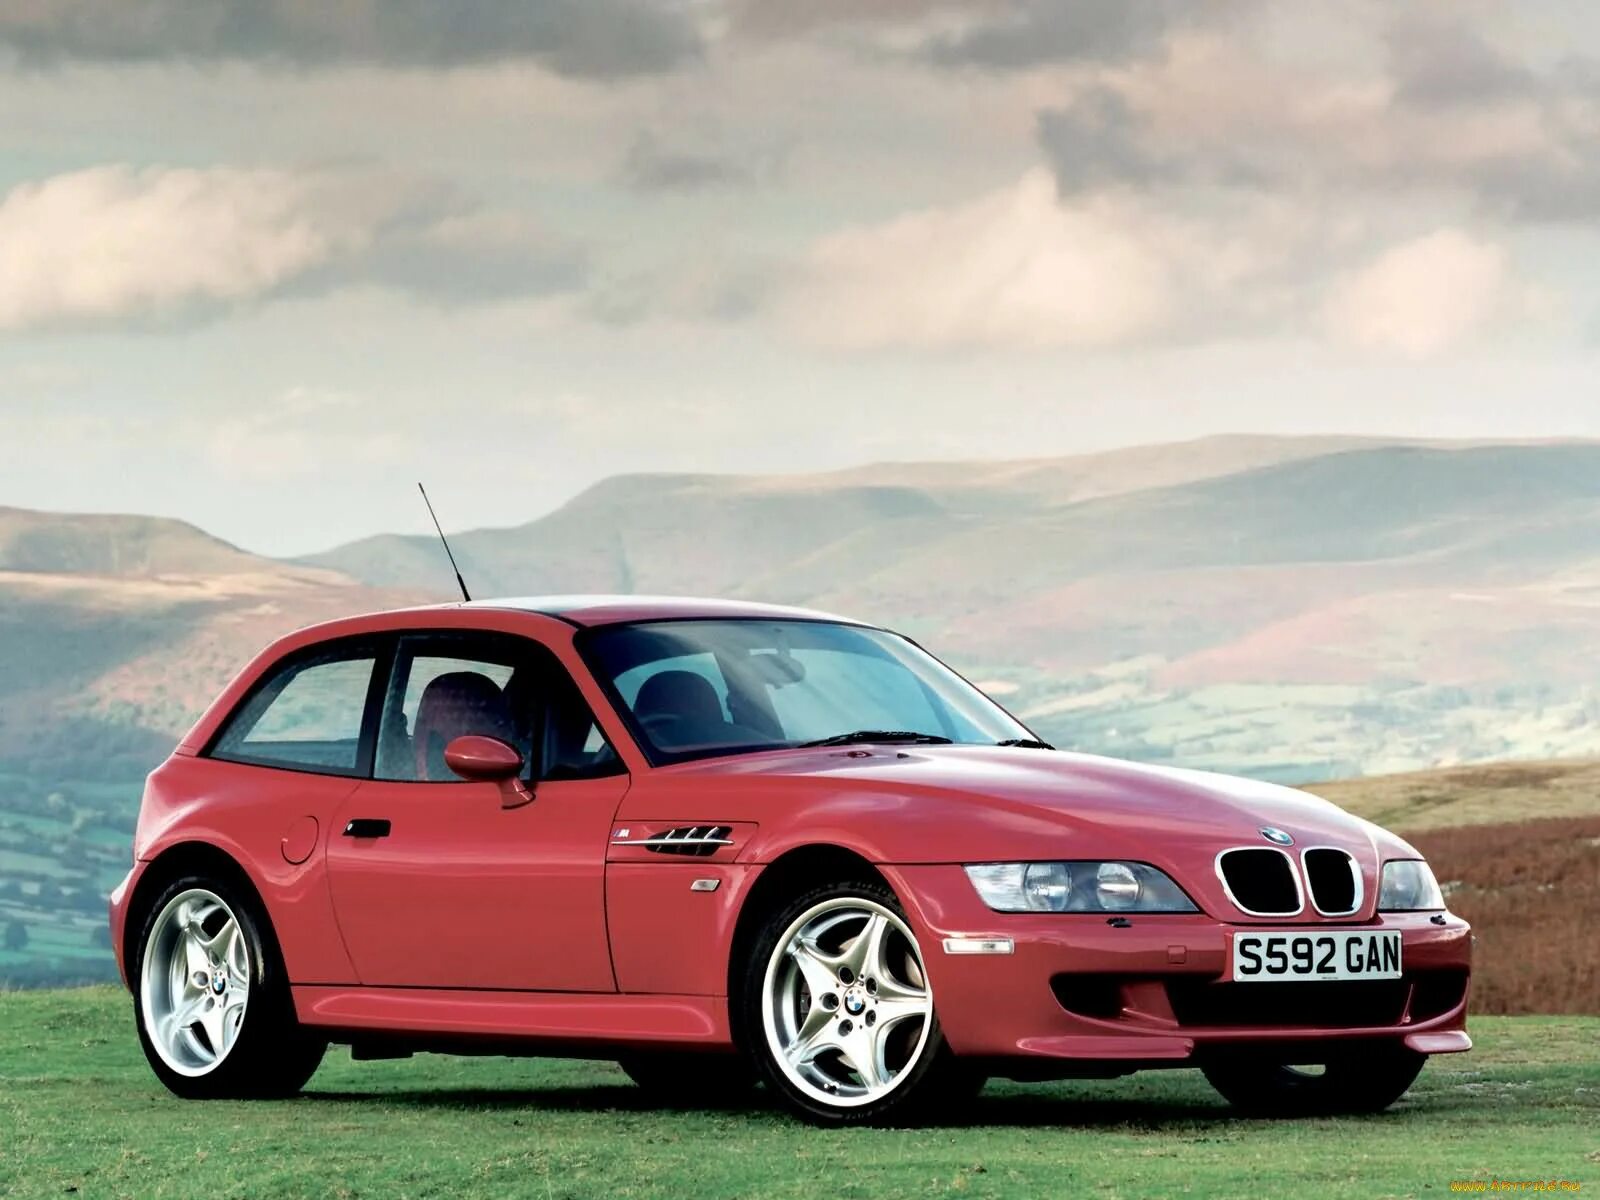 Bmw m coupe. BMW z3 Coupe. Z3 BMW 1998. BMW z3 m Coupe. BMW z3 Coupe 1999.